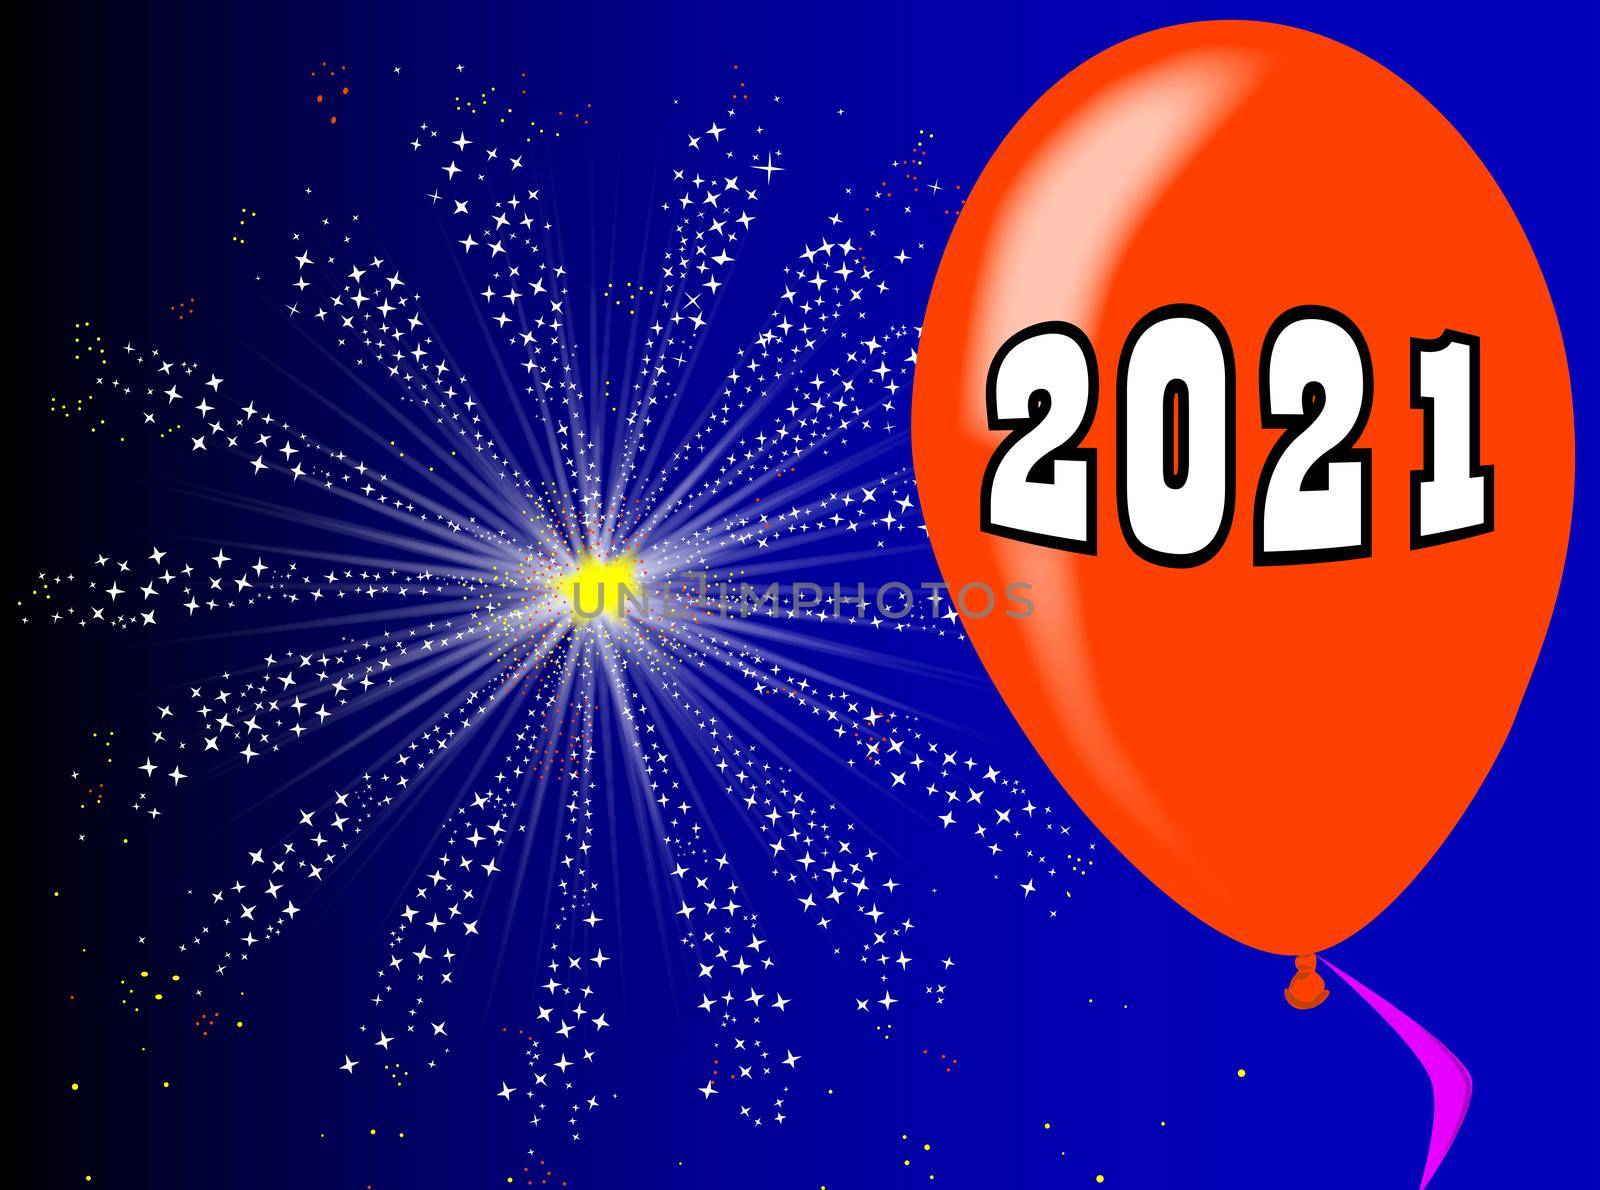 A flyaway red balloon with a skyrocket explosion with fallout and the year 2021